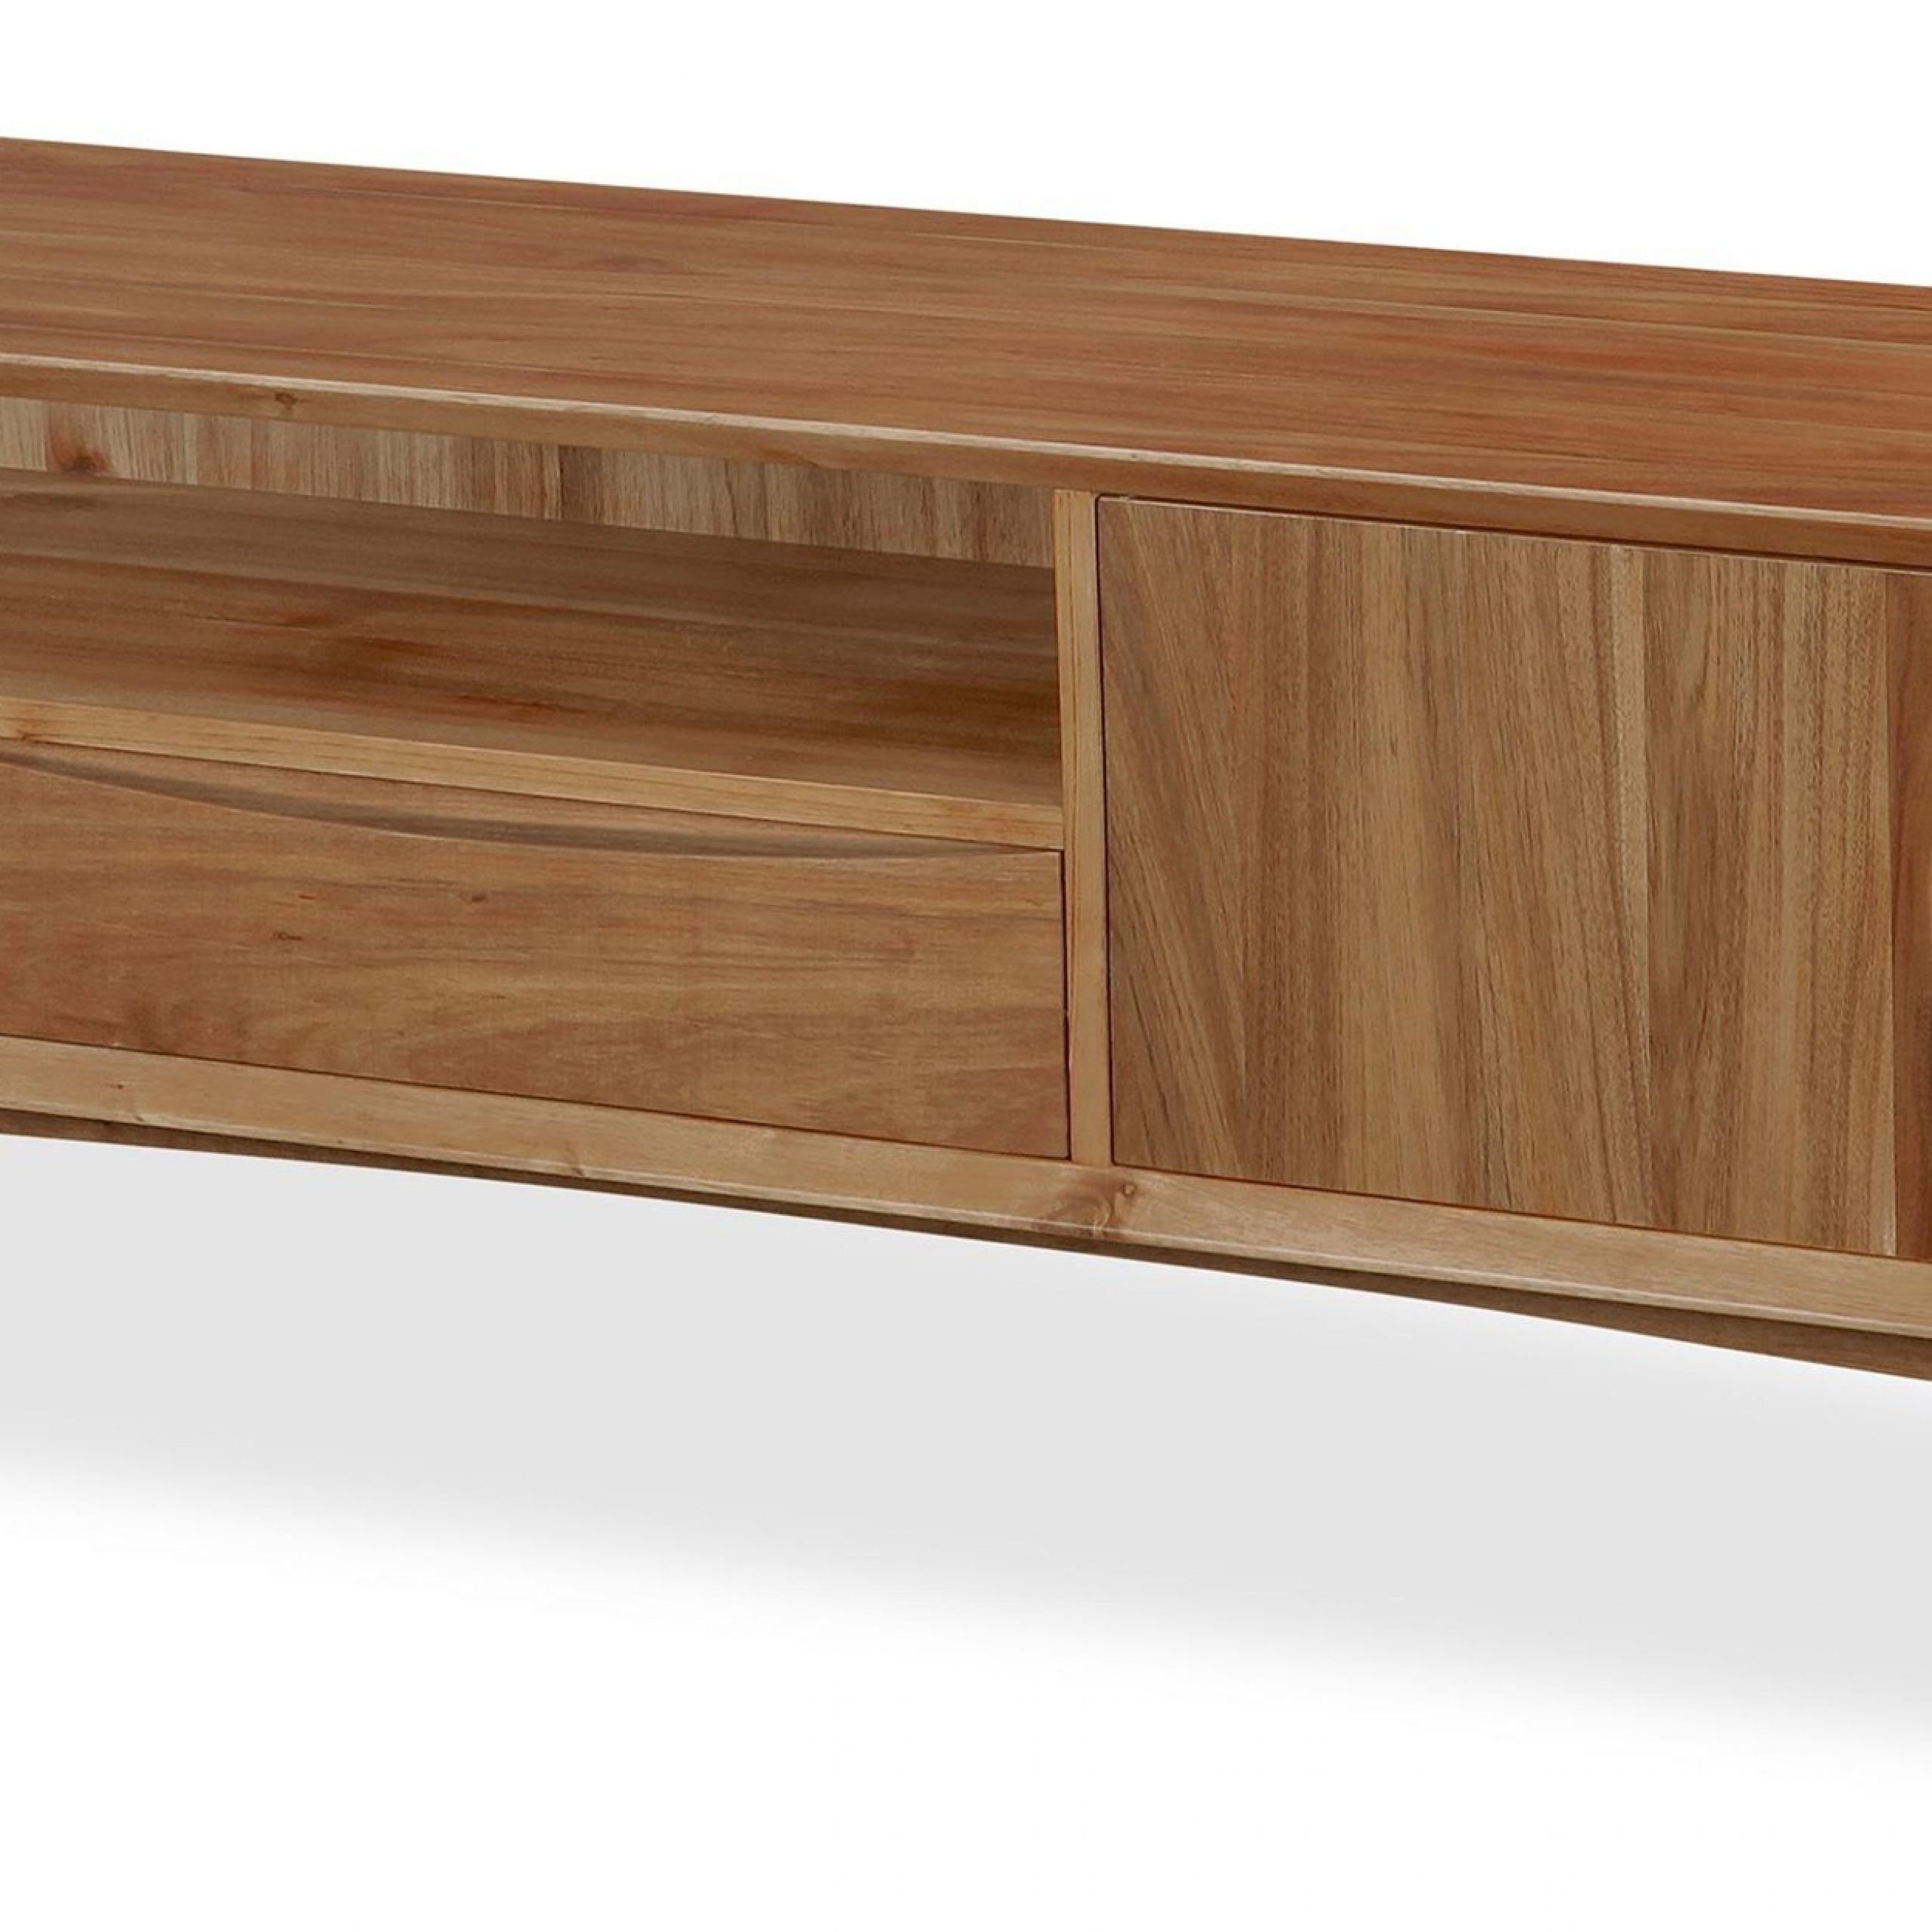 Global Home Berkeley Extra Large Tv Unit | Homeworld Throughout Chromium Extra Wide Tv Unit Stands (View 8 of 20)